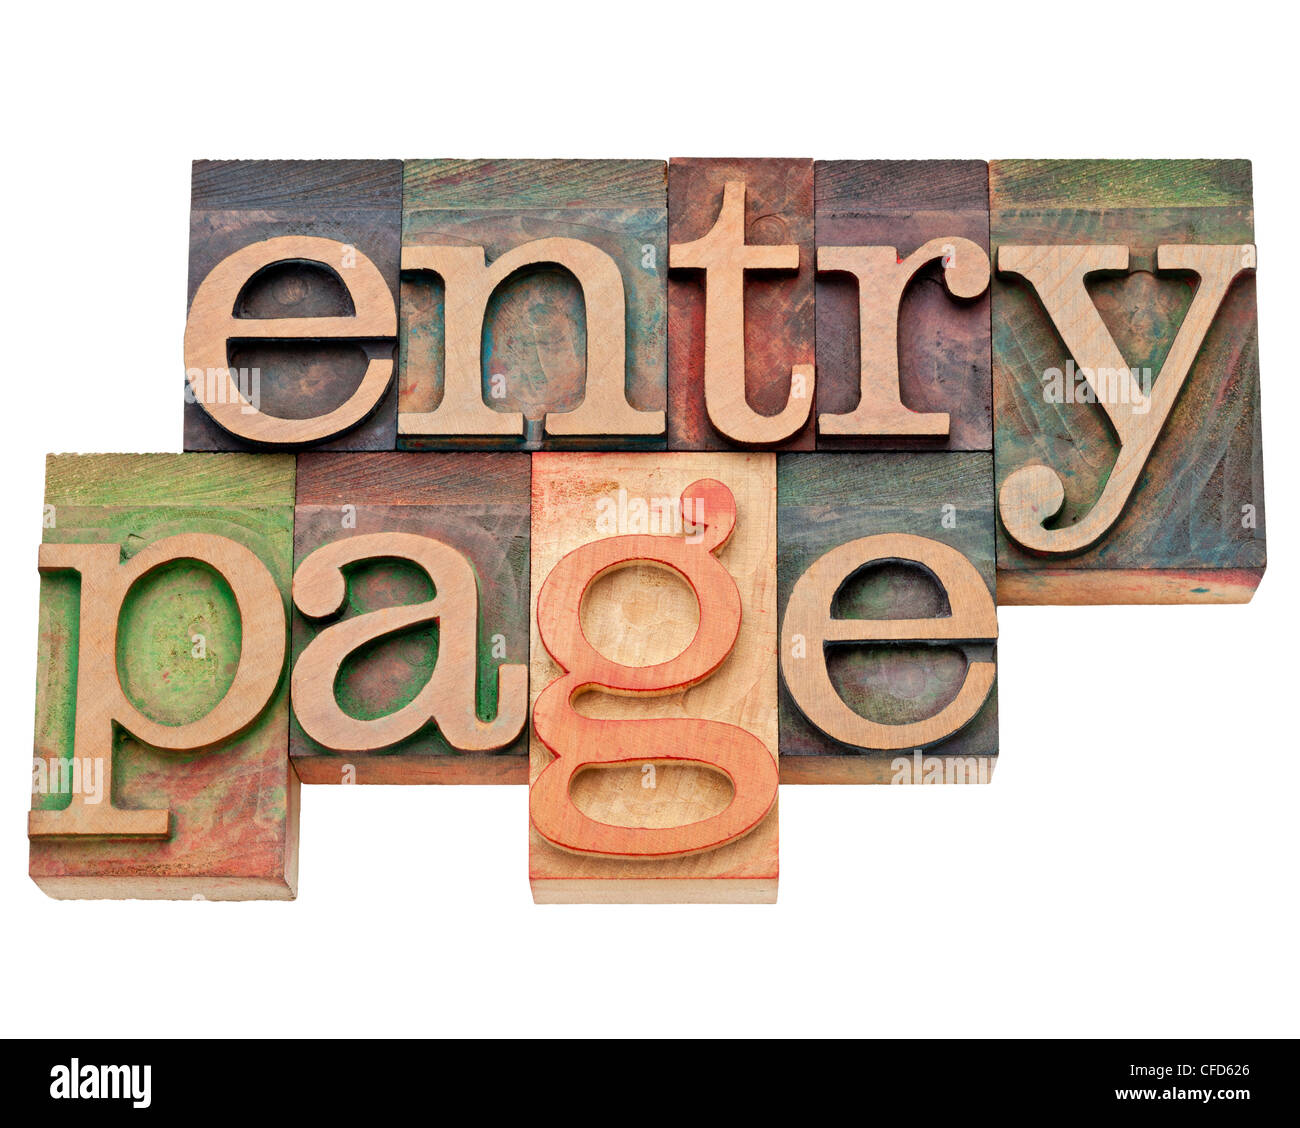 entry page - internet concept - isolated text in vintage wood letterpress type, stained by color inks Stock Photo